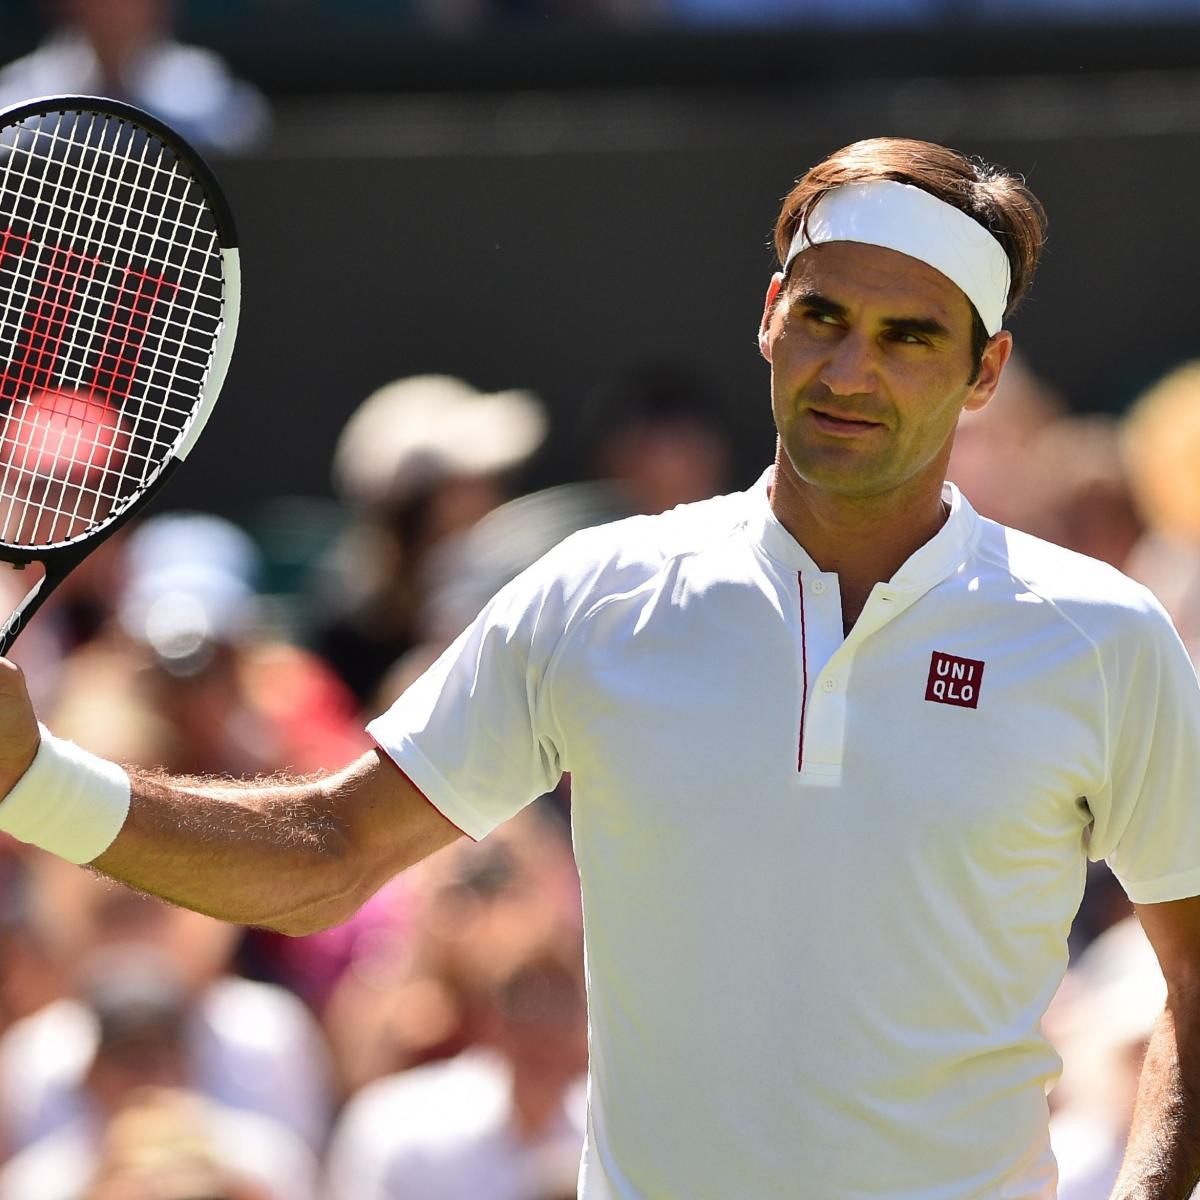 Roger Federer Wears Uniqlo at 2018 Wimbledon: 'It's Been a Long Time Coming ...